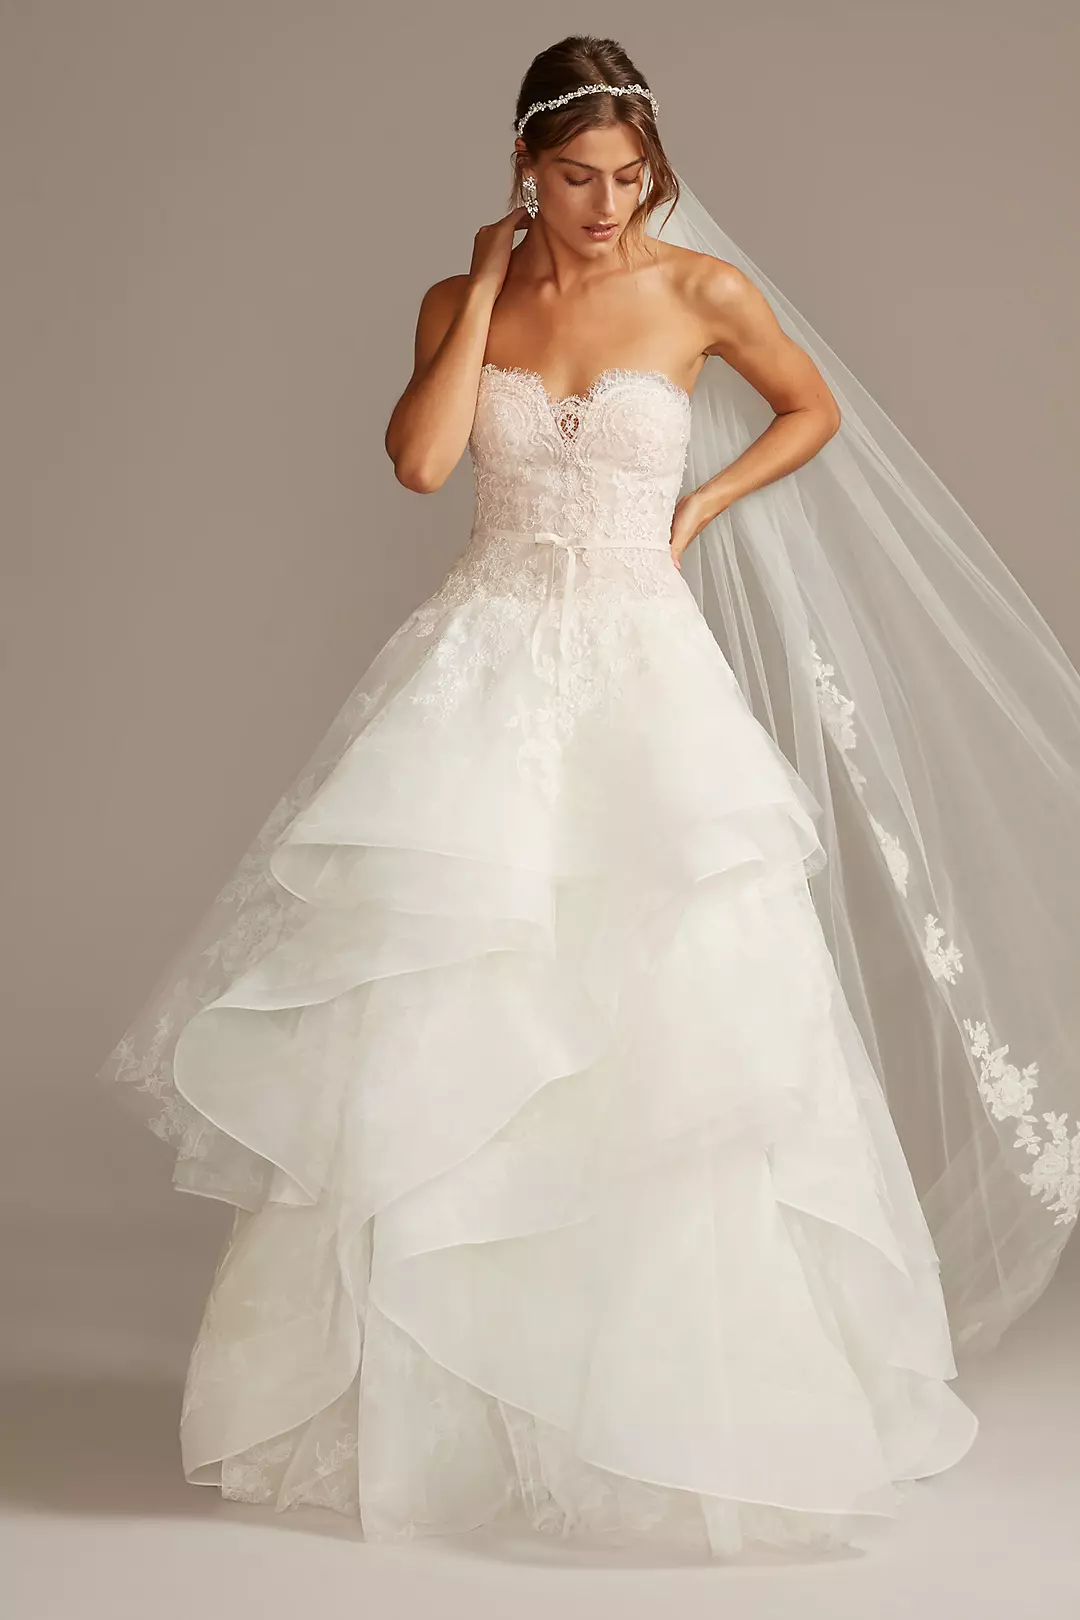 Printed Tulle Wedding Dress with Tiered Skirt Image